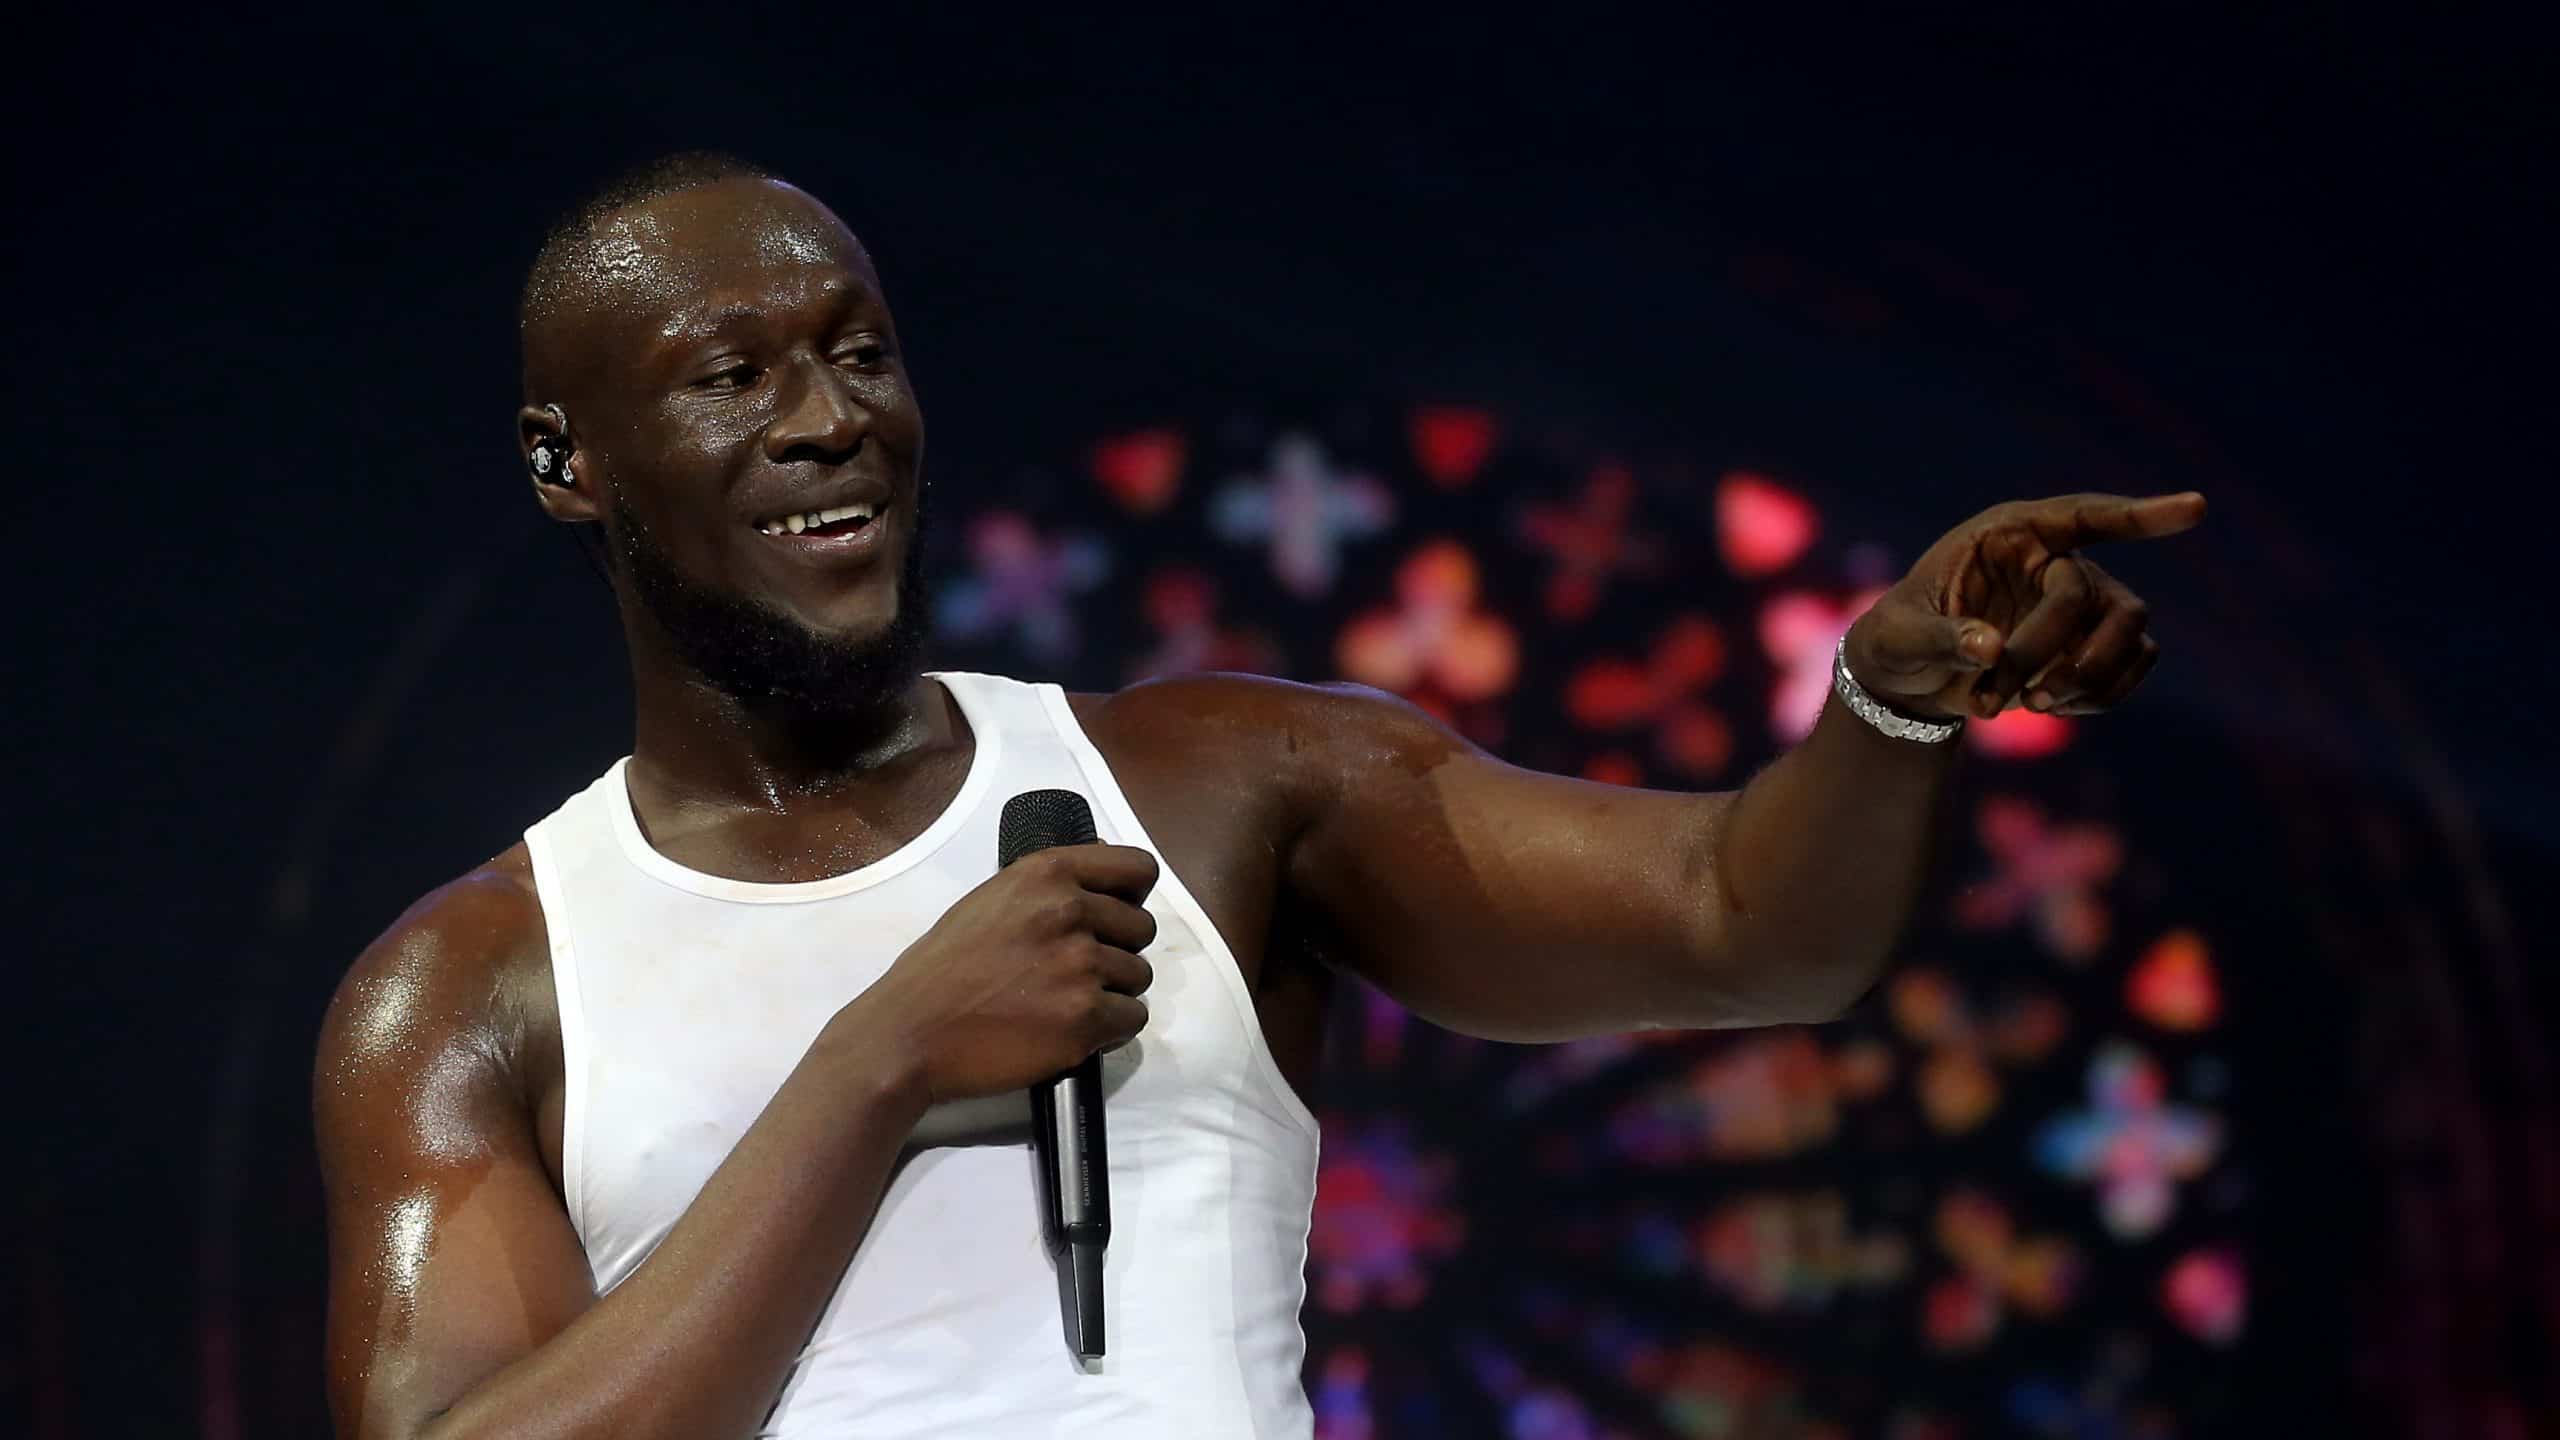 Stormzy donates half a million pounds to scholarships for students from disadvantaged backgrounds